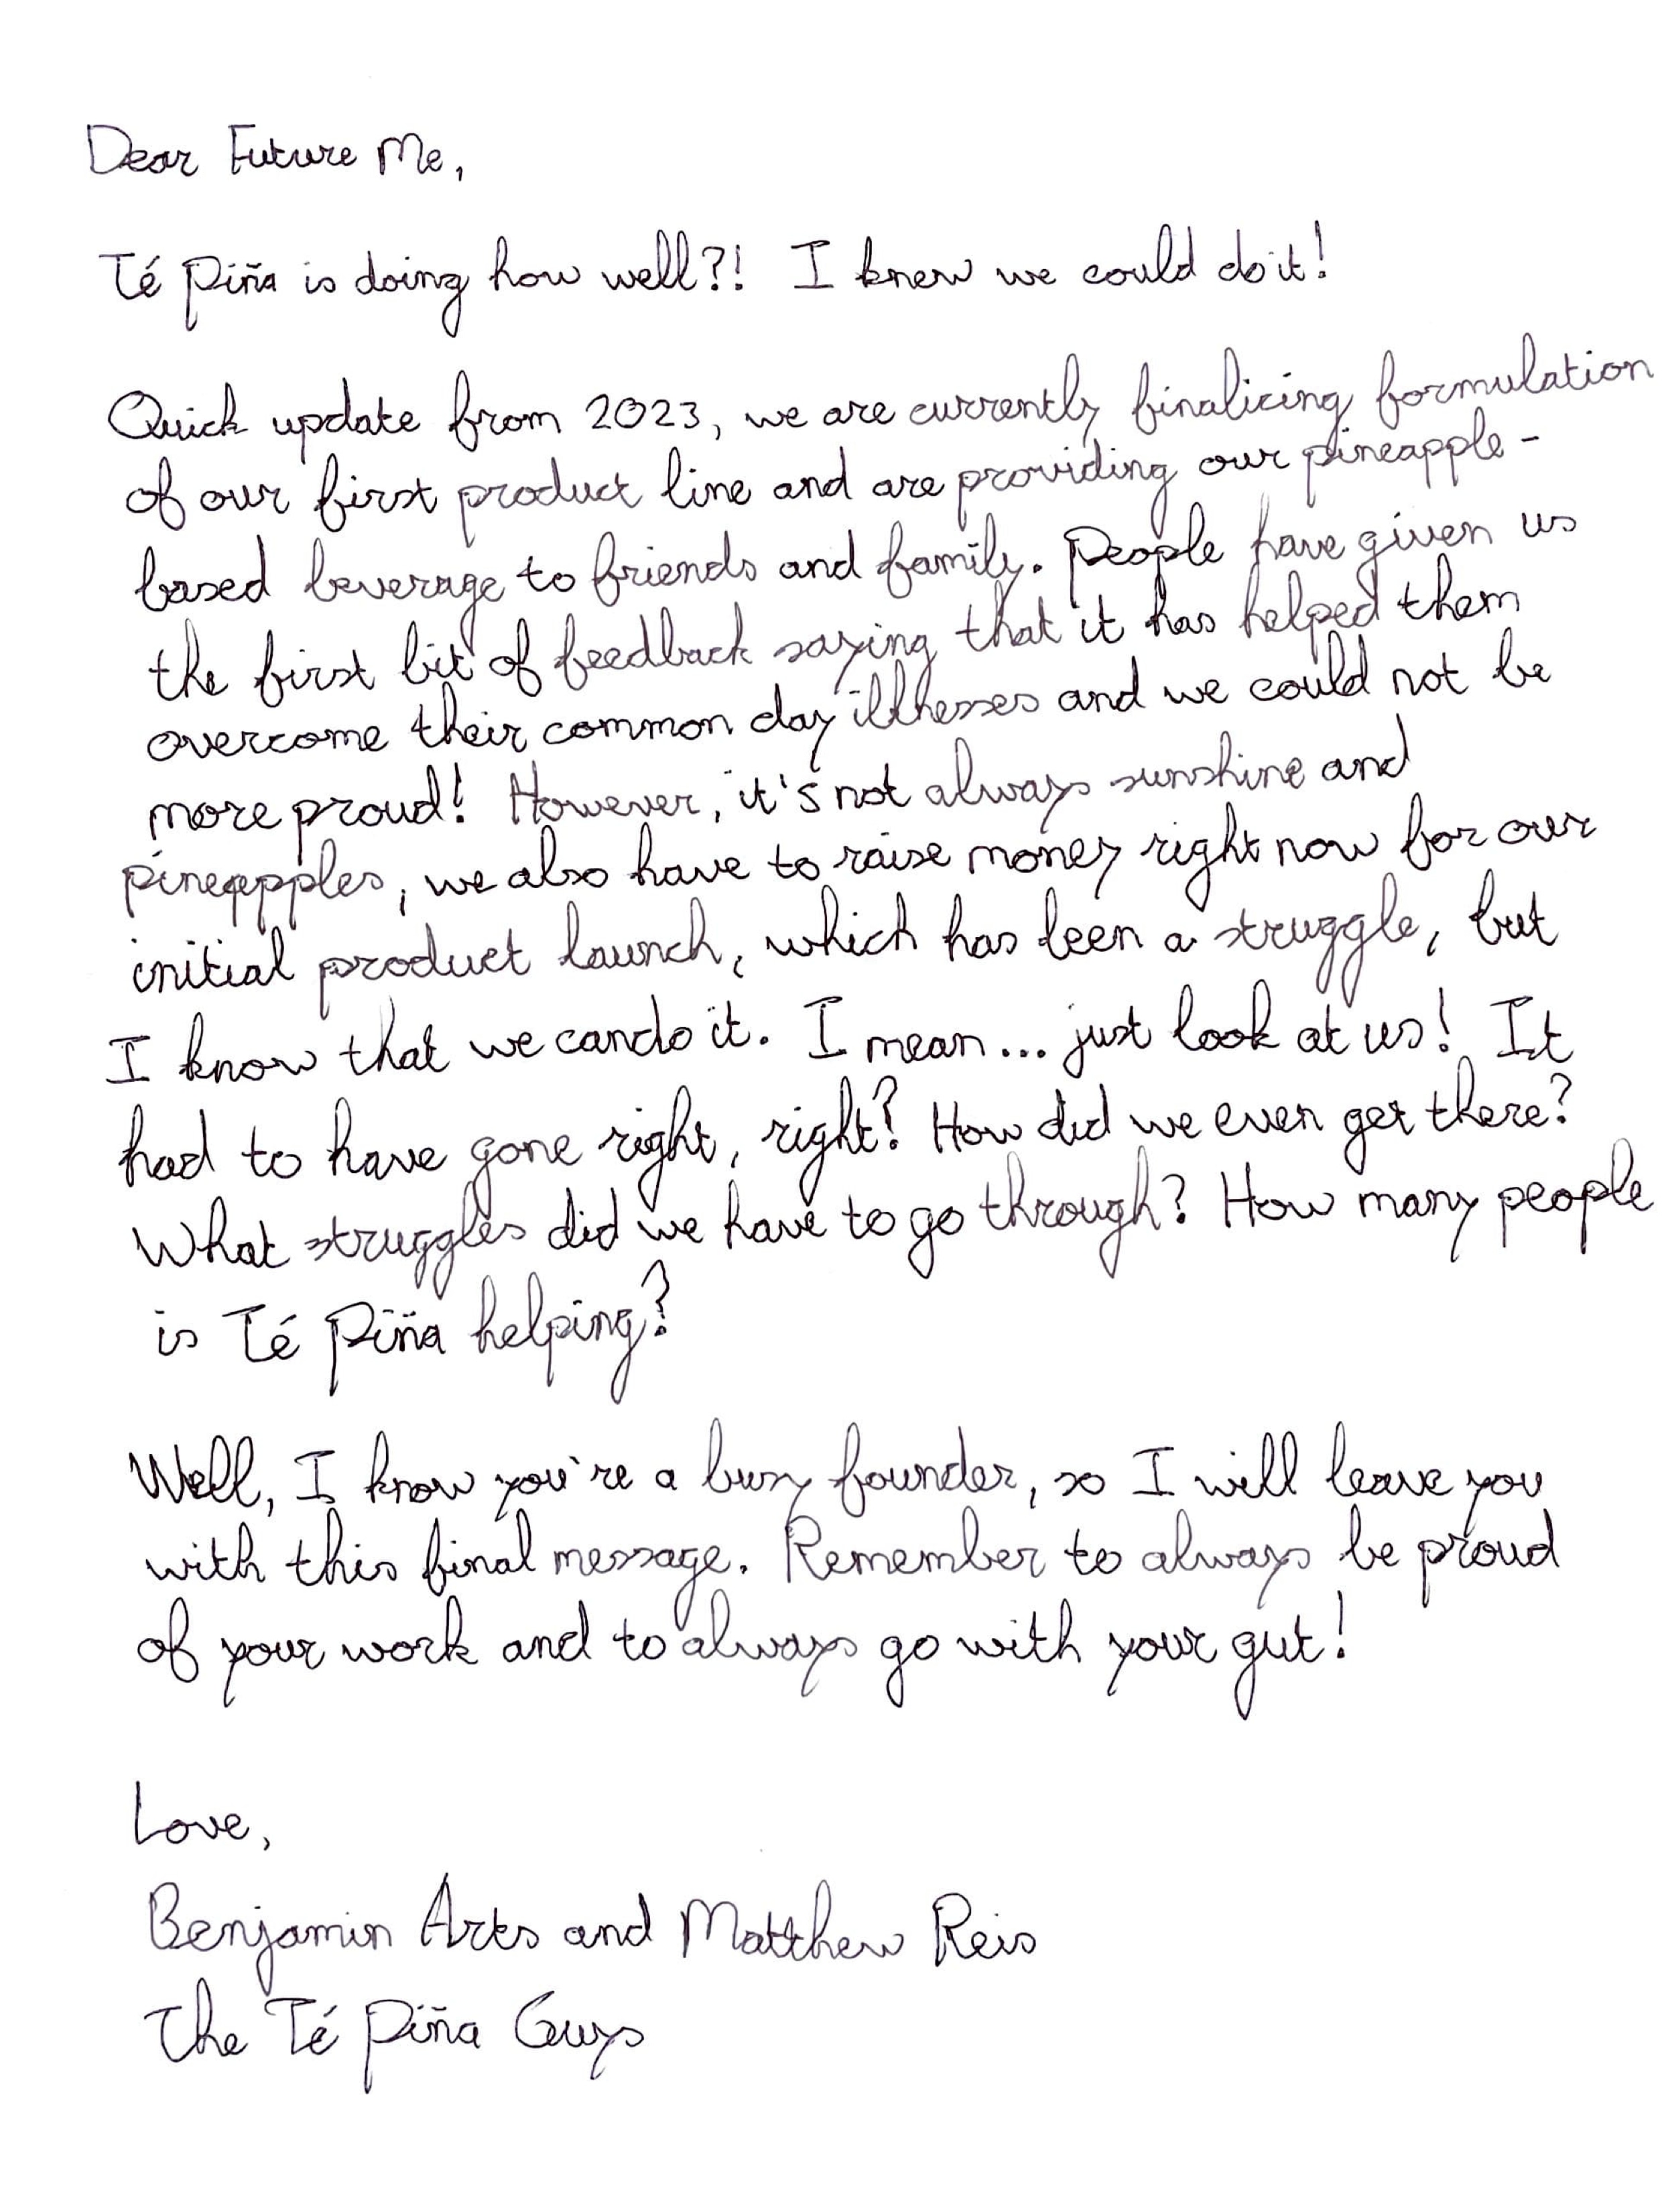 A handwritten letter by Benjamin Arts and Matthew Reis to their future selves. 